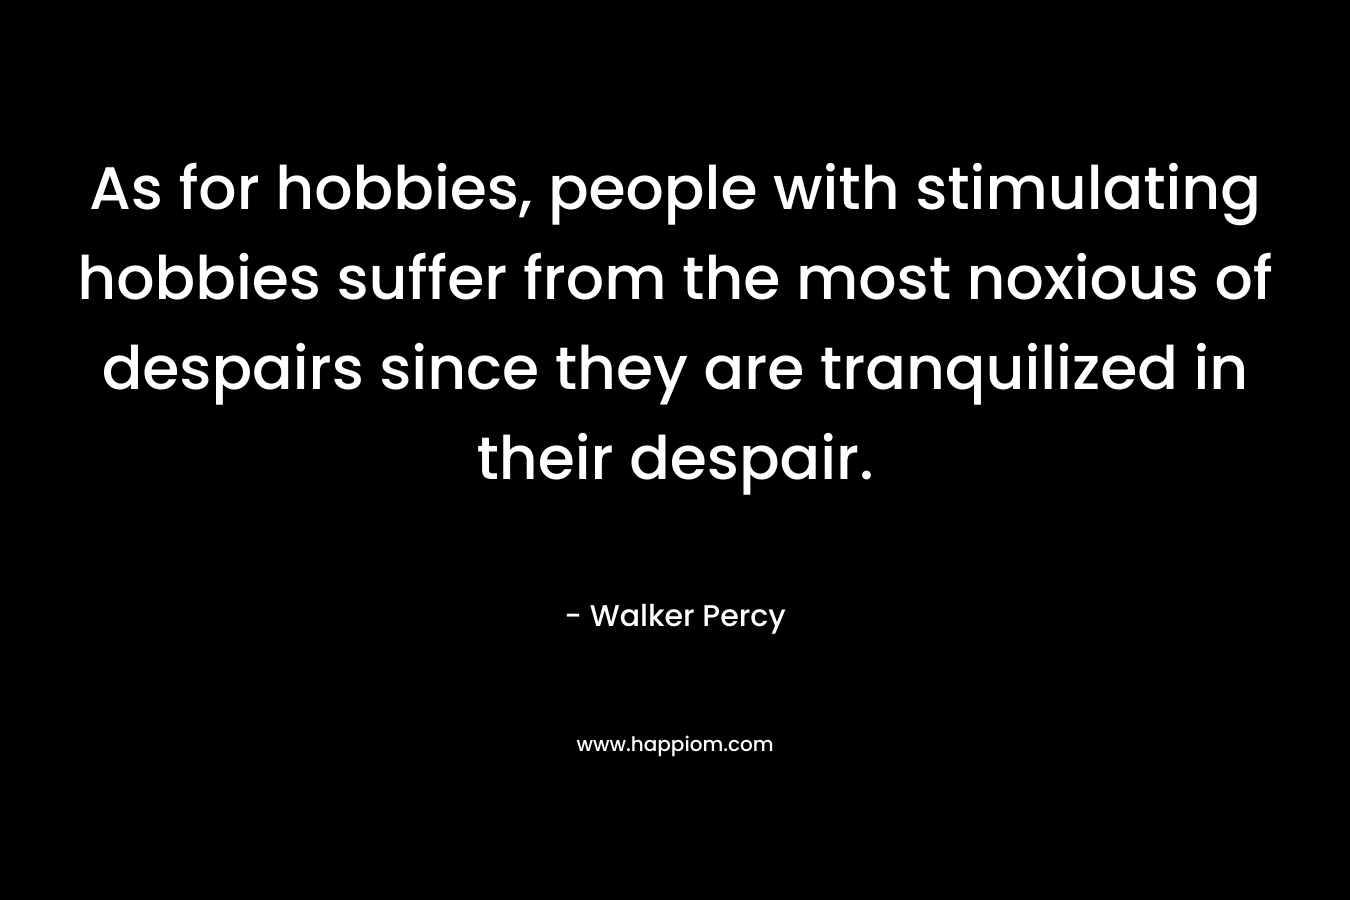 As for hobbies, people with stimulating hobbies suffer from the most noxious of despairs since they are tranquilized in their despair. – Walker Percy